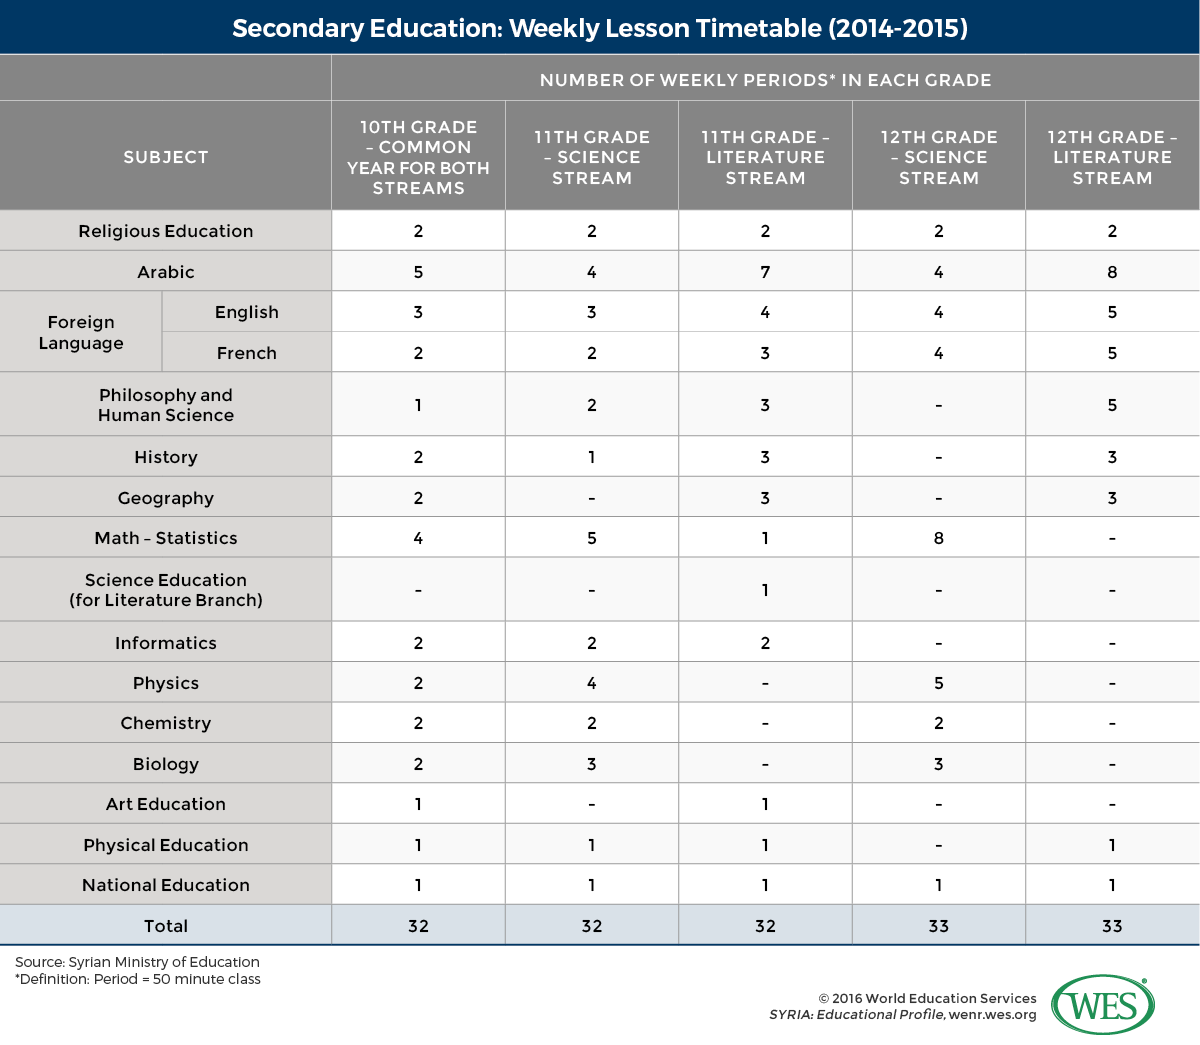 A table showing the weekly lesson timetable for secondary education in Syria in 2014/15. 